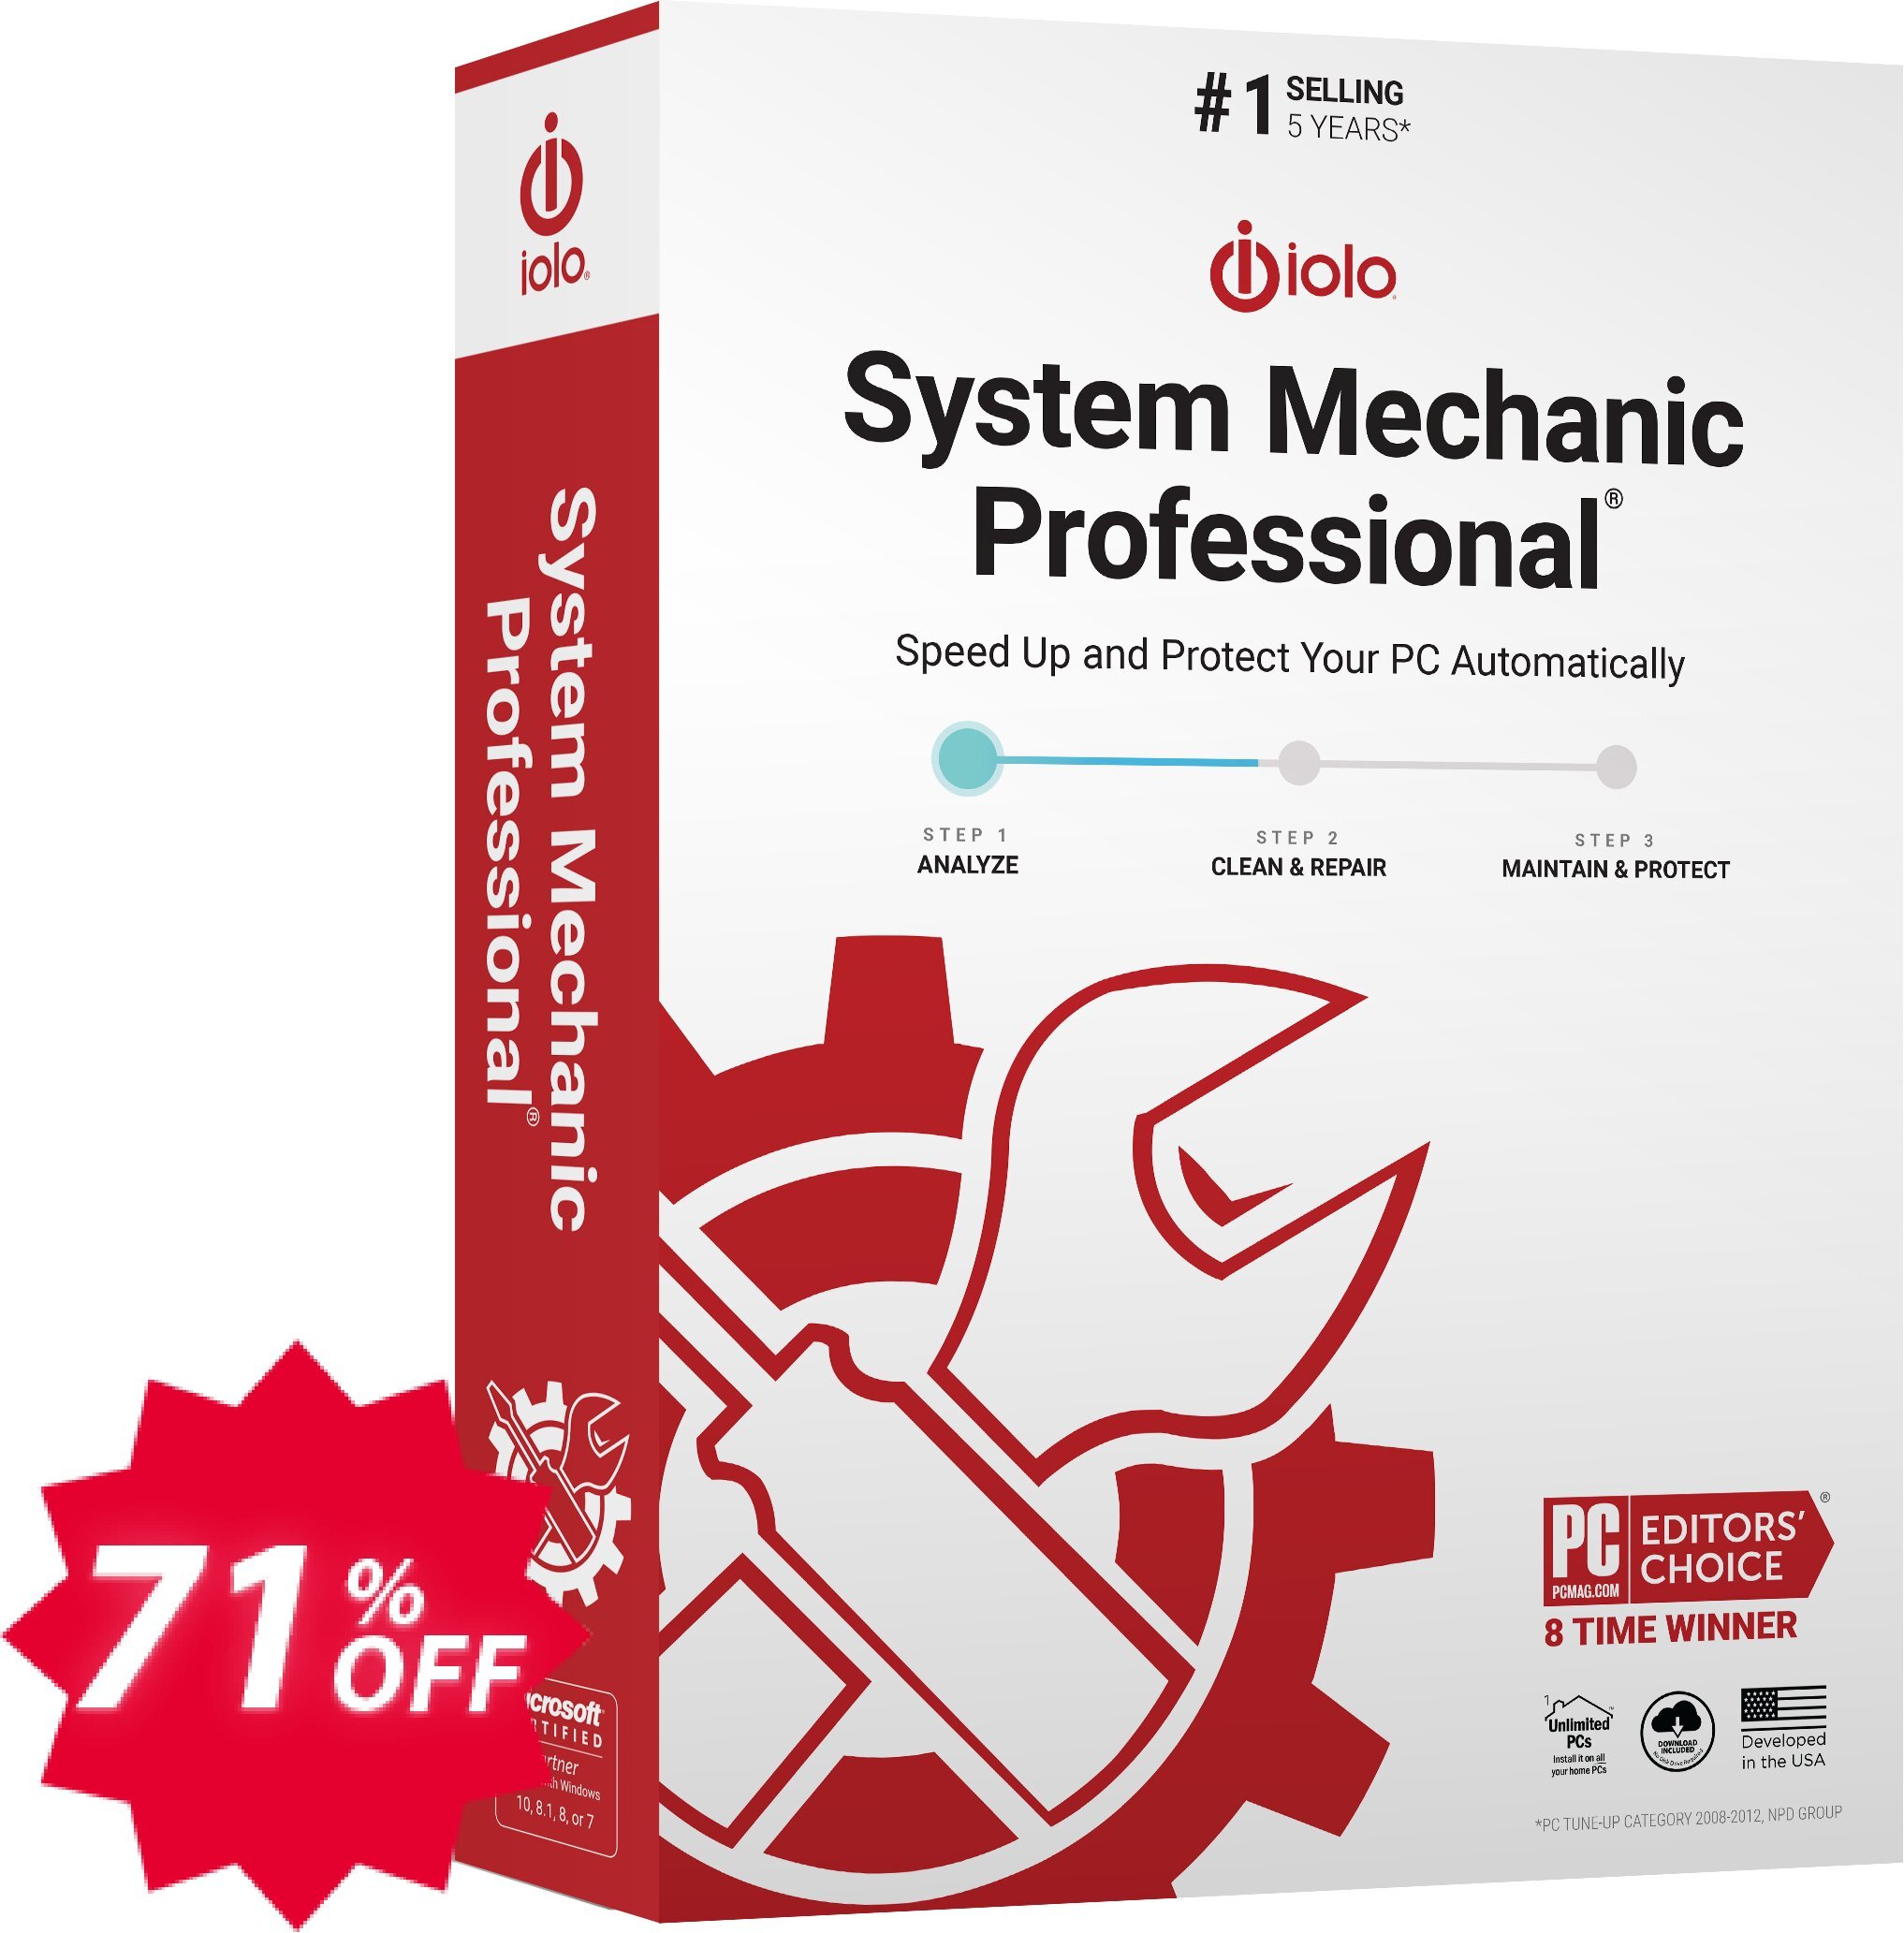 iolo System Mechanic Pro 22 Coupon code 71% discount 